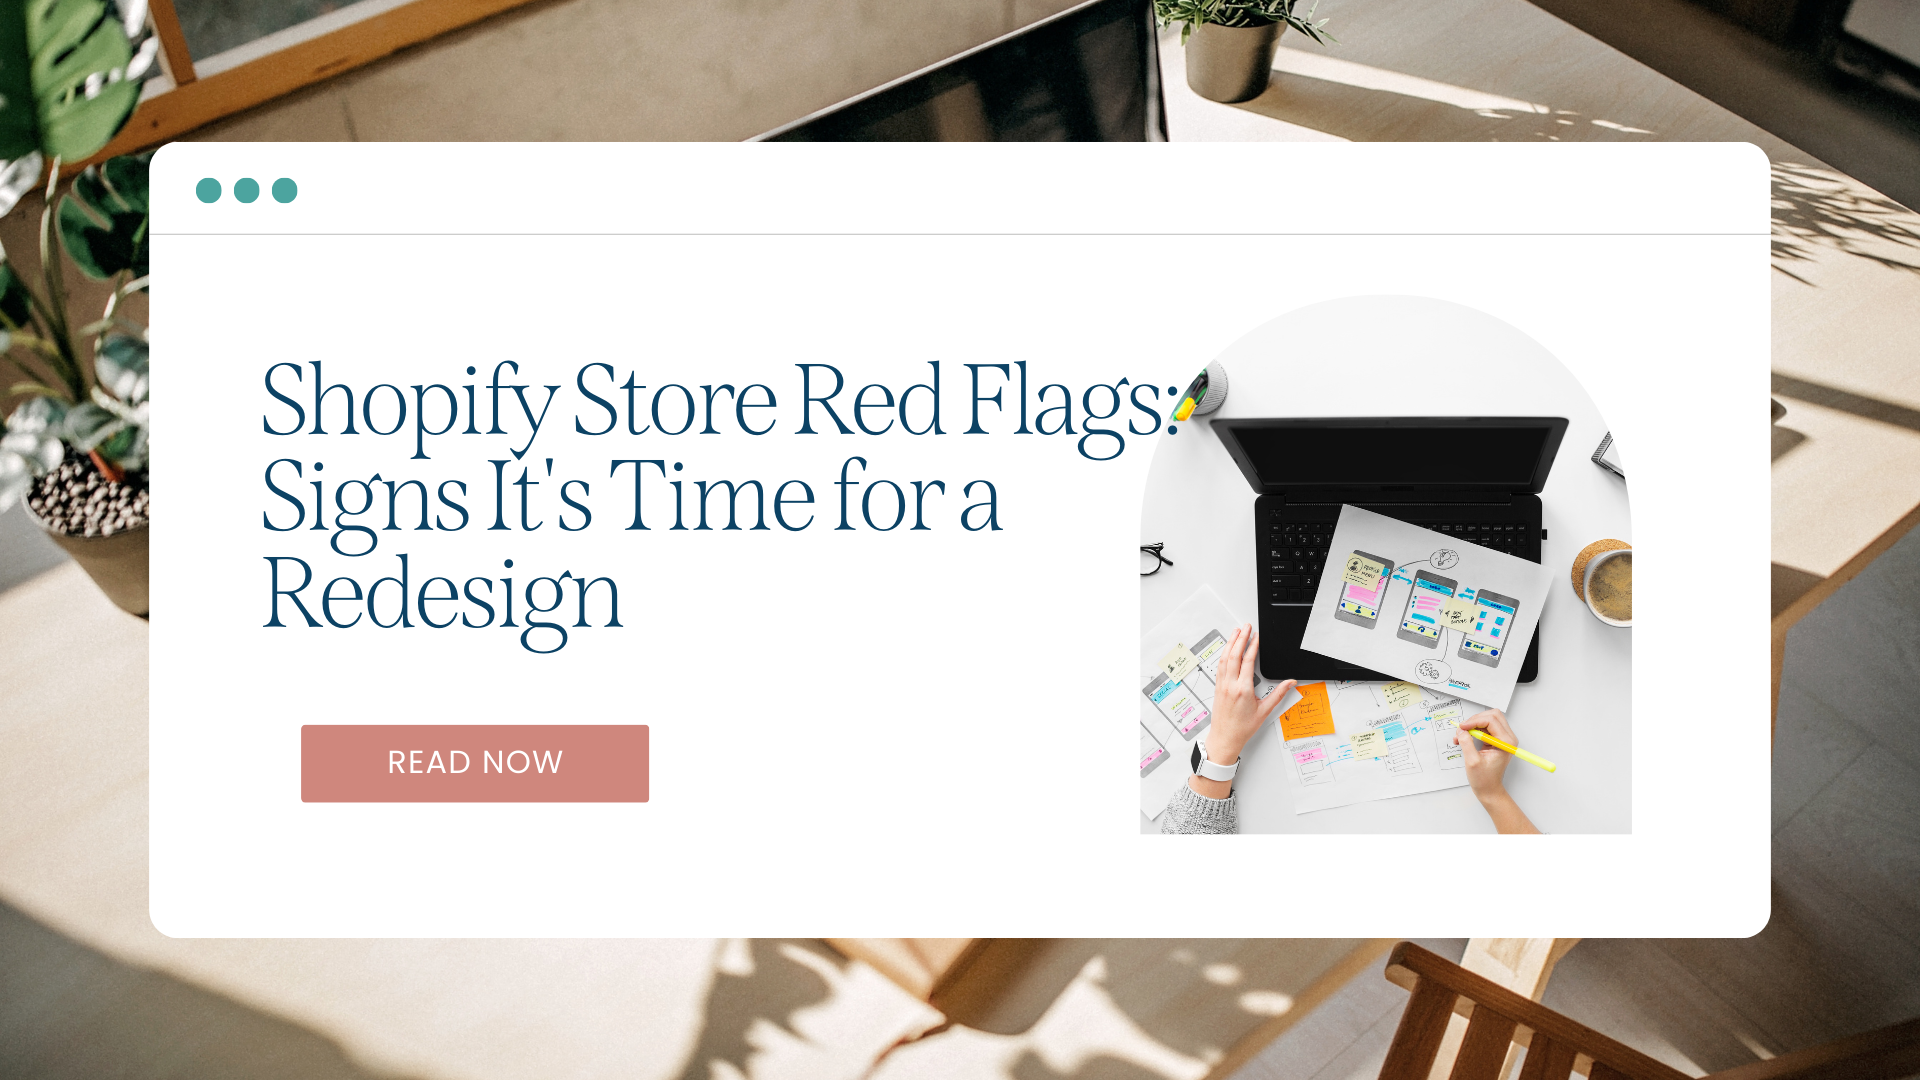 Shopify Store Red Flags: Signs It's Time for a Redesign